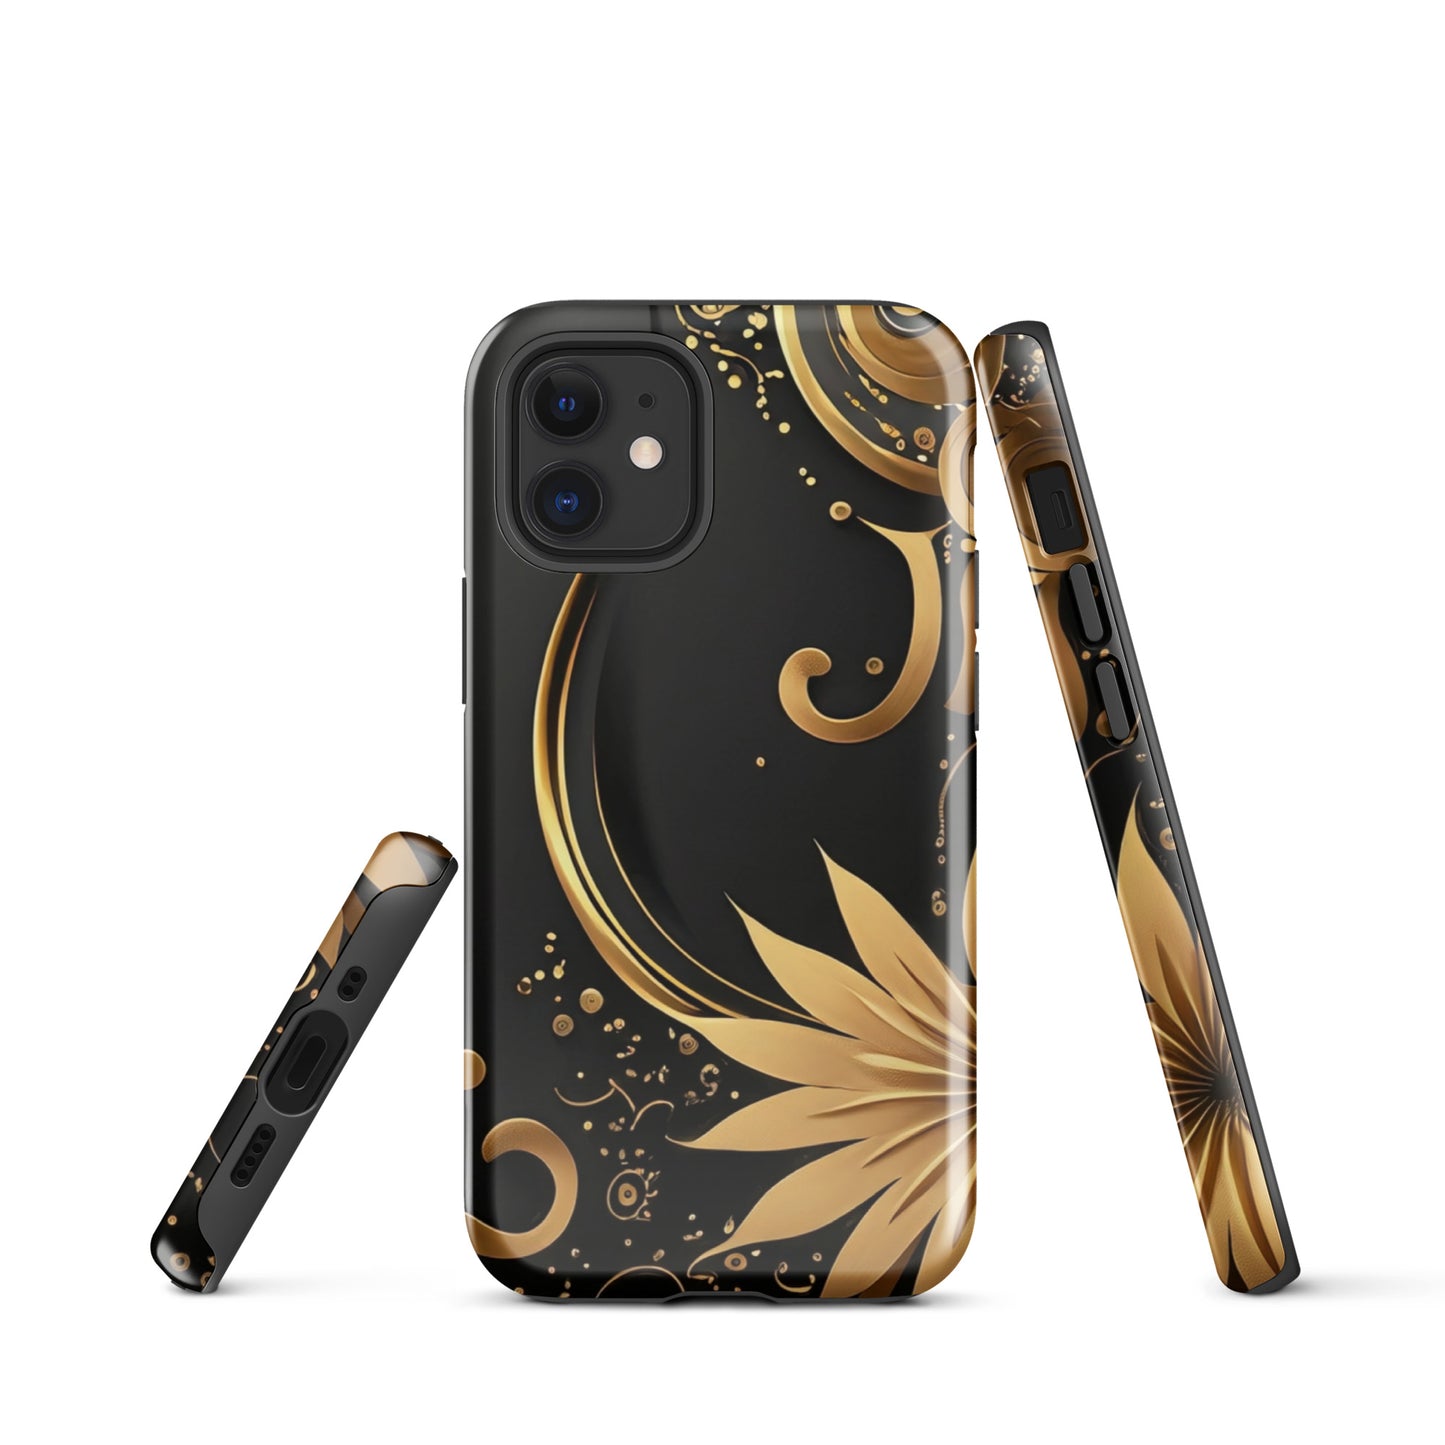 A Golden Flower Case for the iPhone 12 Mini